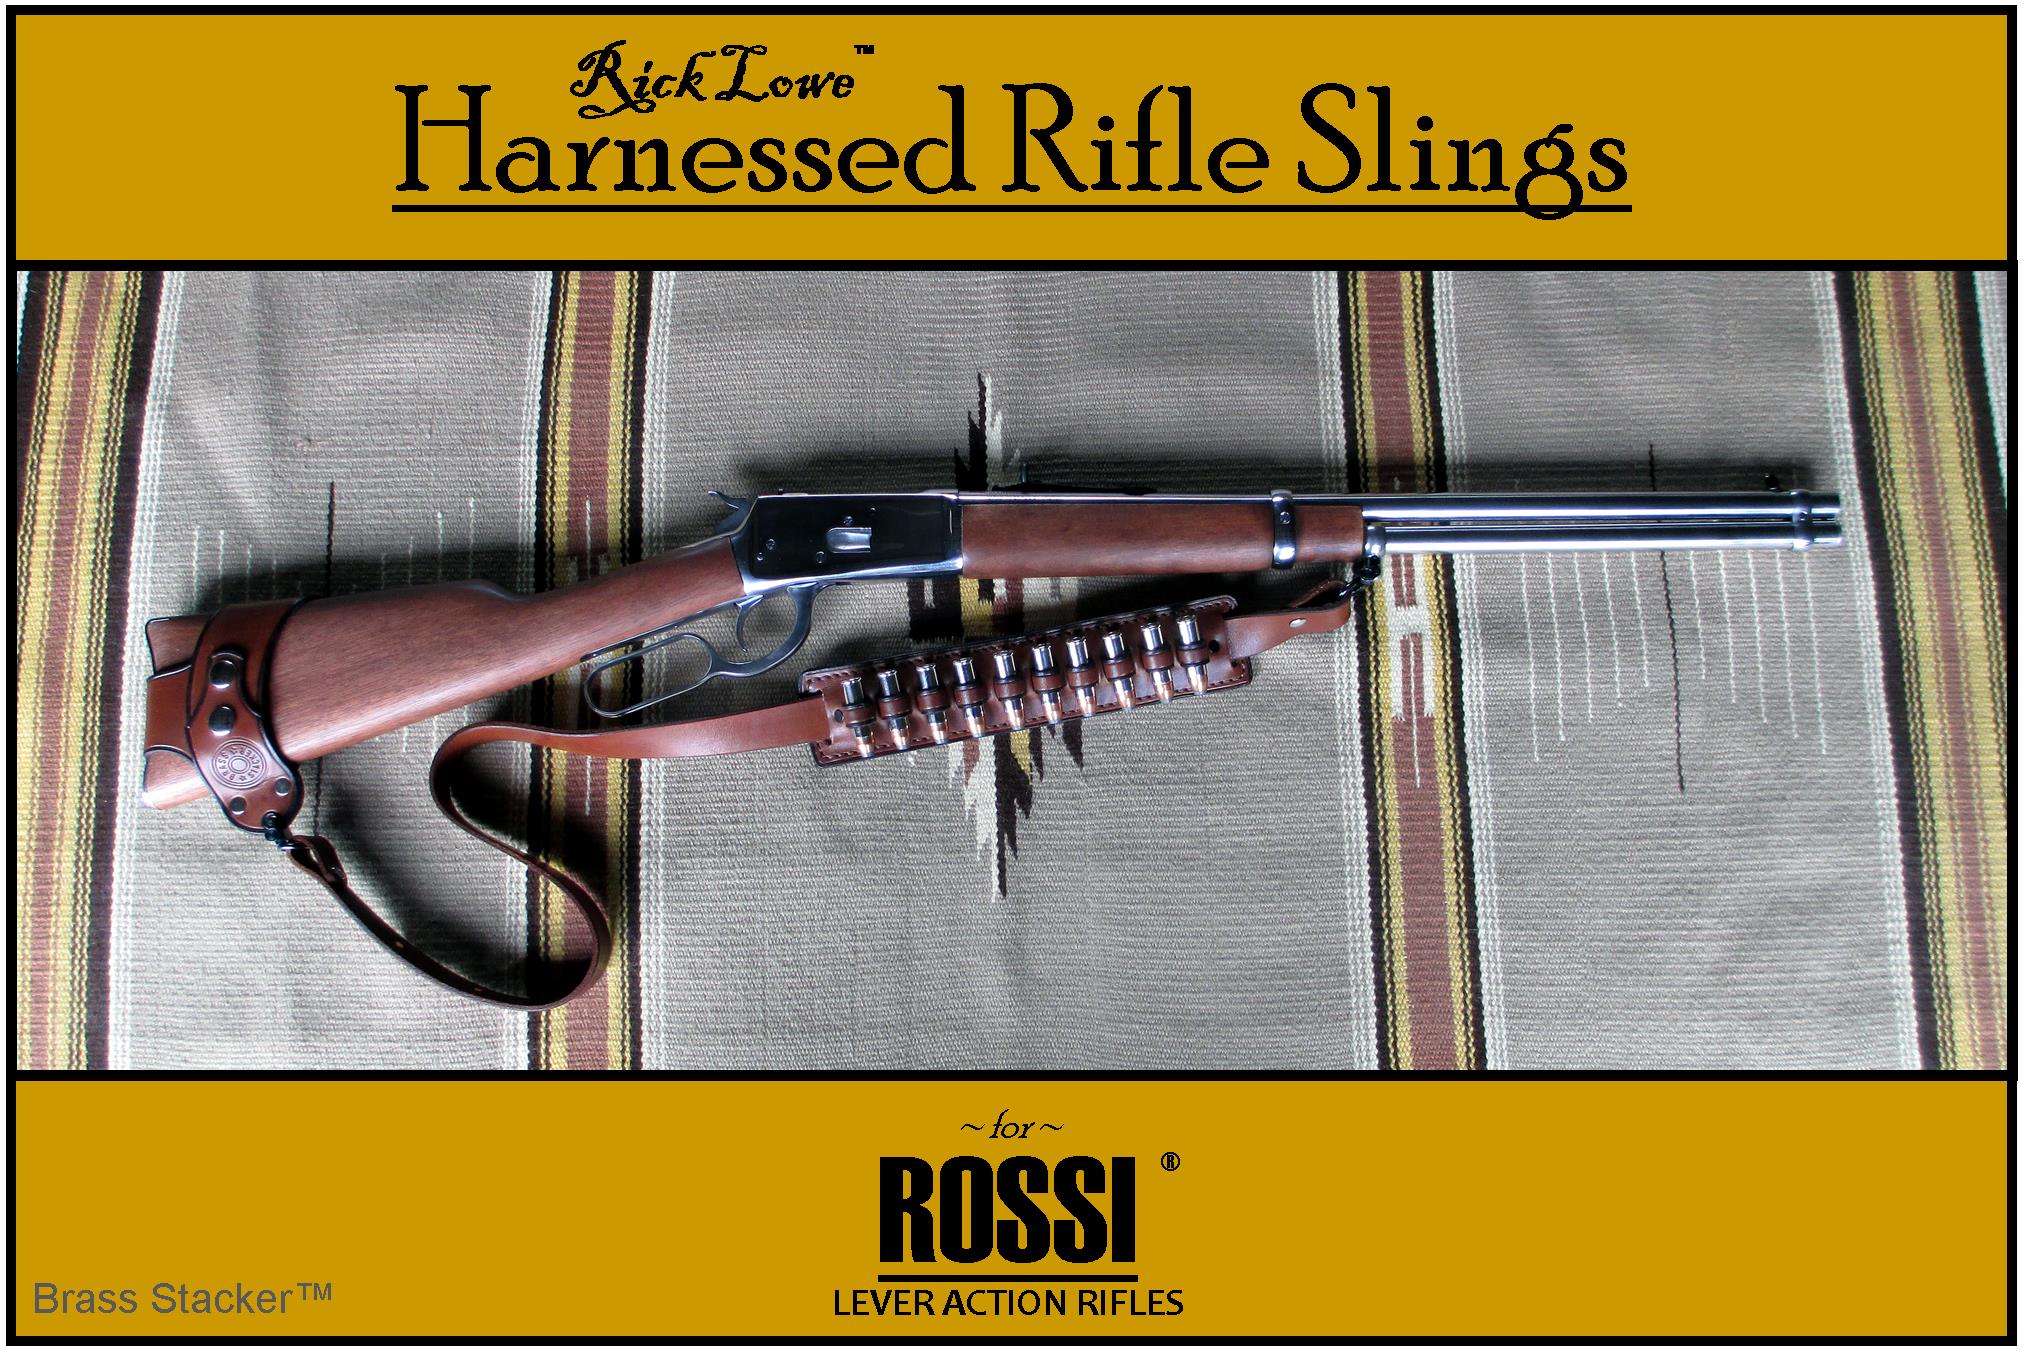 Brass Stacker™ RLO No-Drill Harnessed Rifle Sling for MOSSBERG®